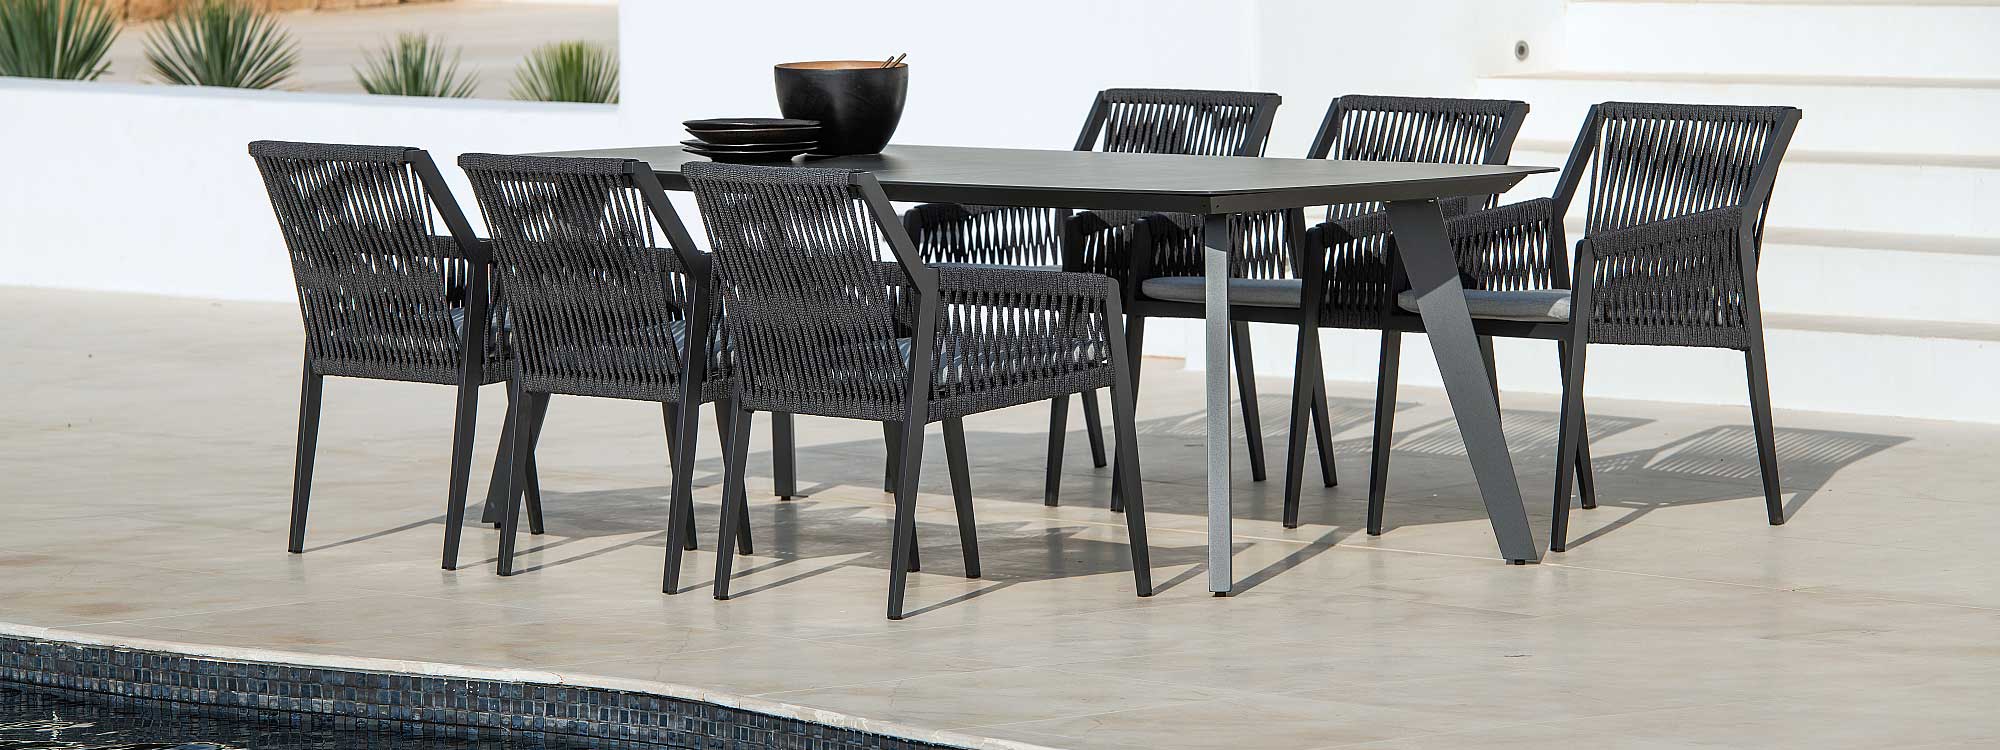 Image of 6 Ritz garden chairs around Ritz ceramic garden table with charcoal frame on sunny terrace